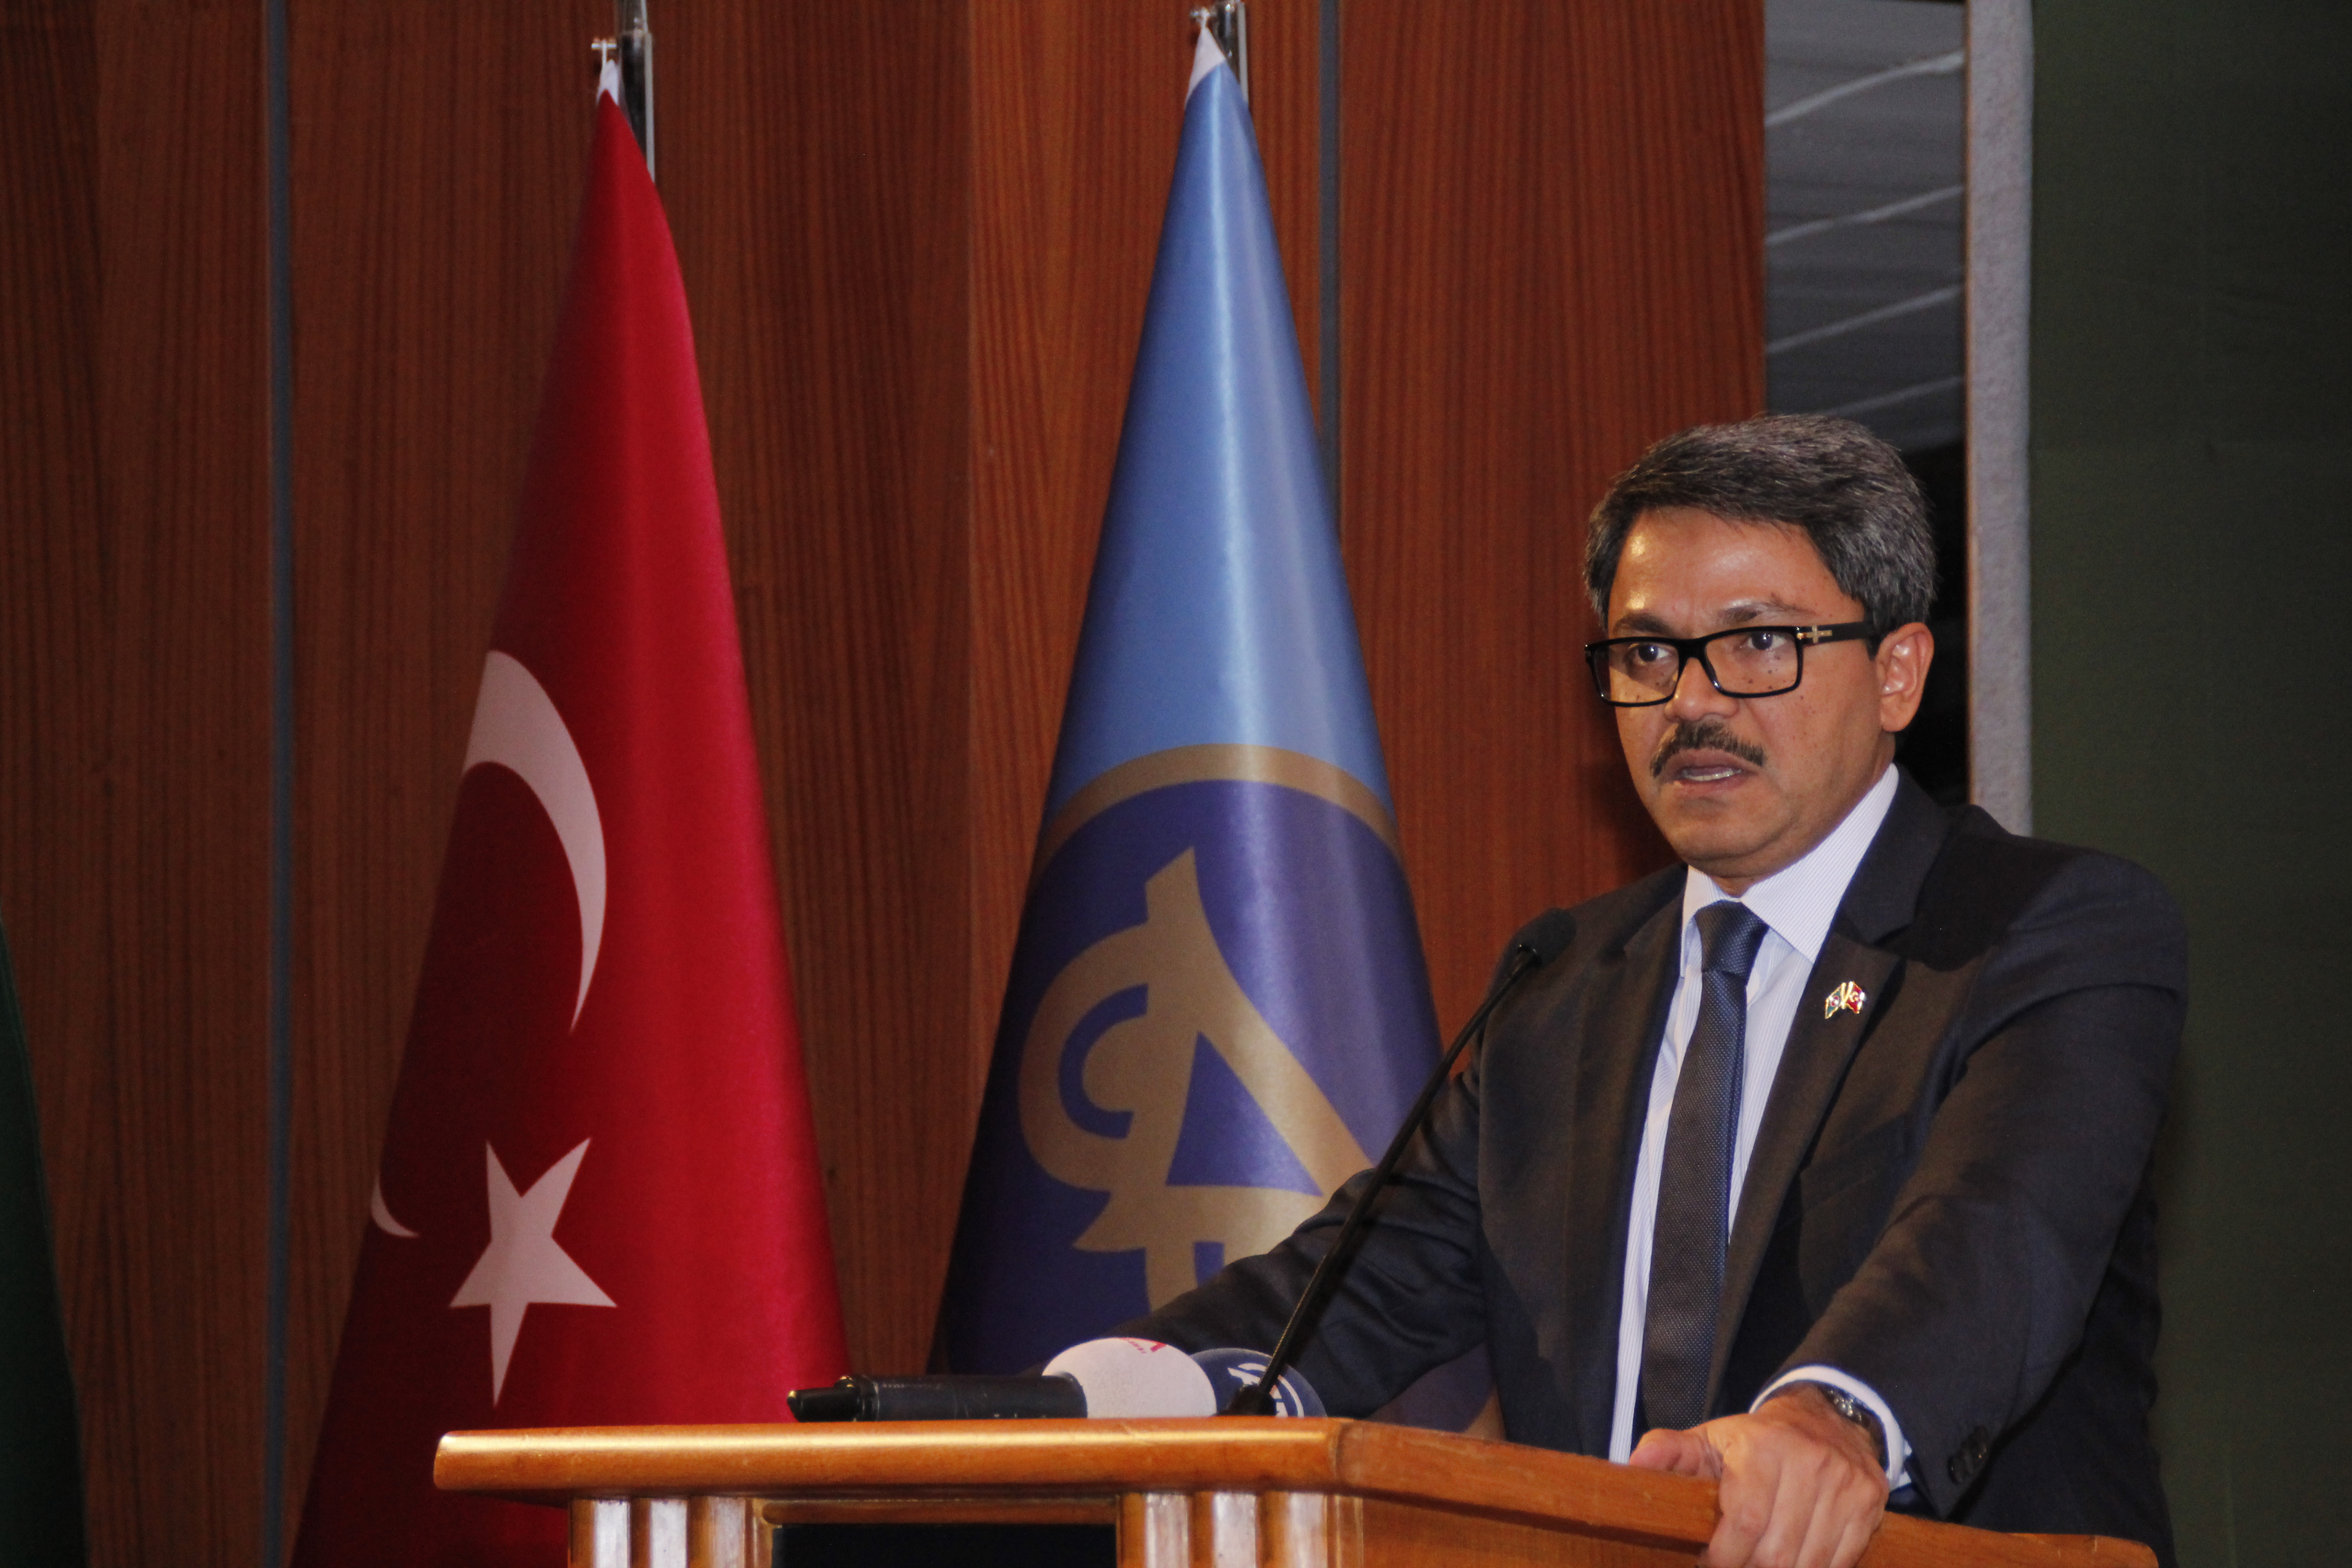  Bangladesh celebrated Victory Day in İstanbul